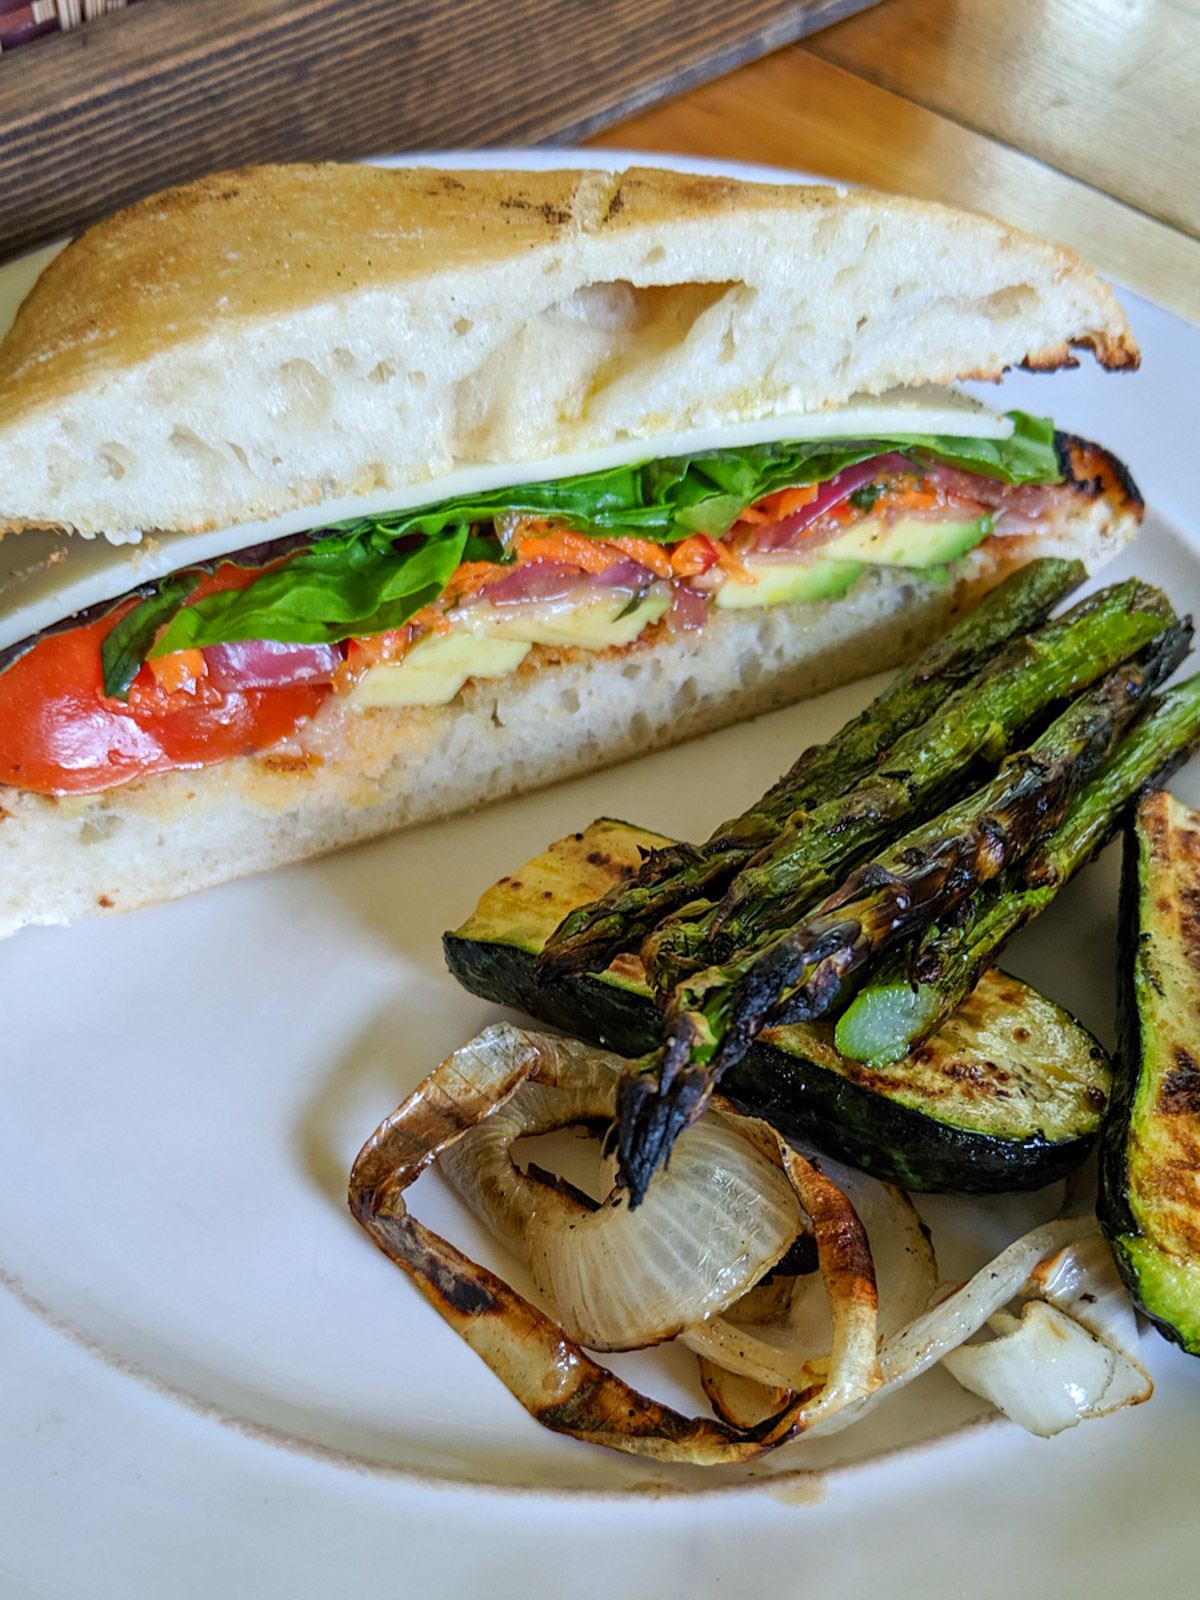 A sandwich wedge of Italian Sub with giardiniera on a plate with grilled veggies.